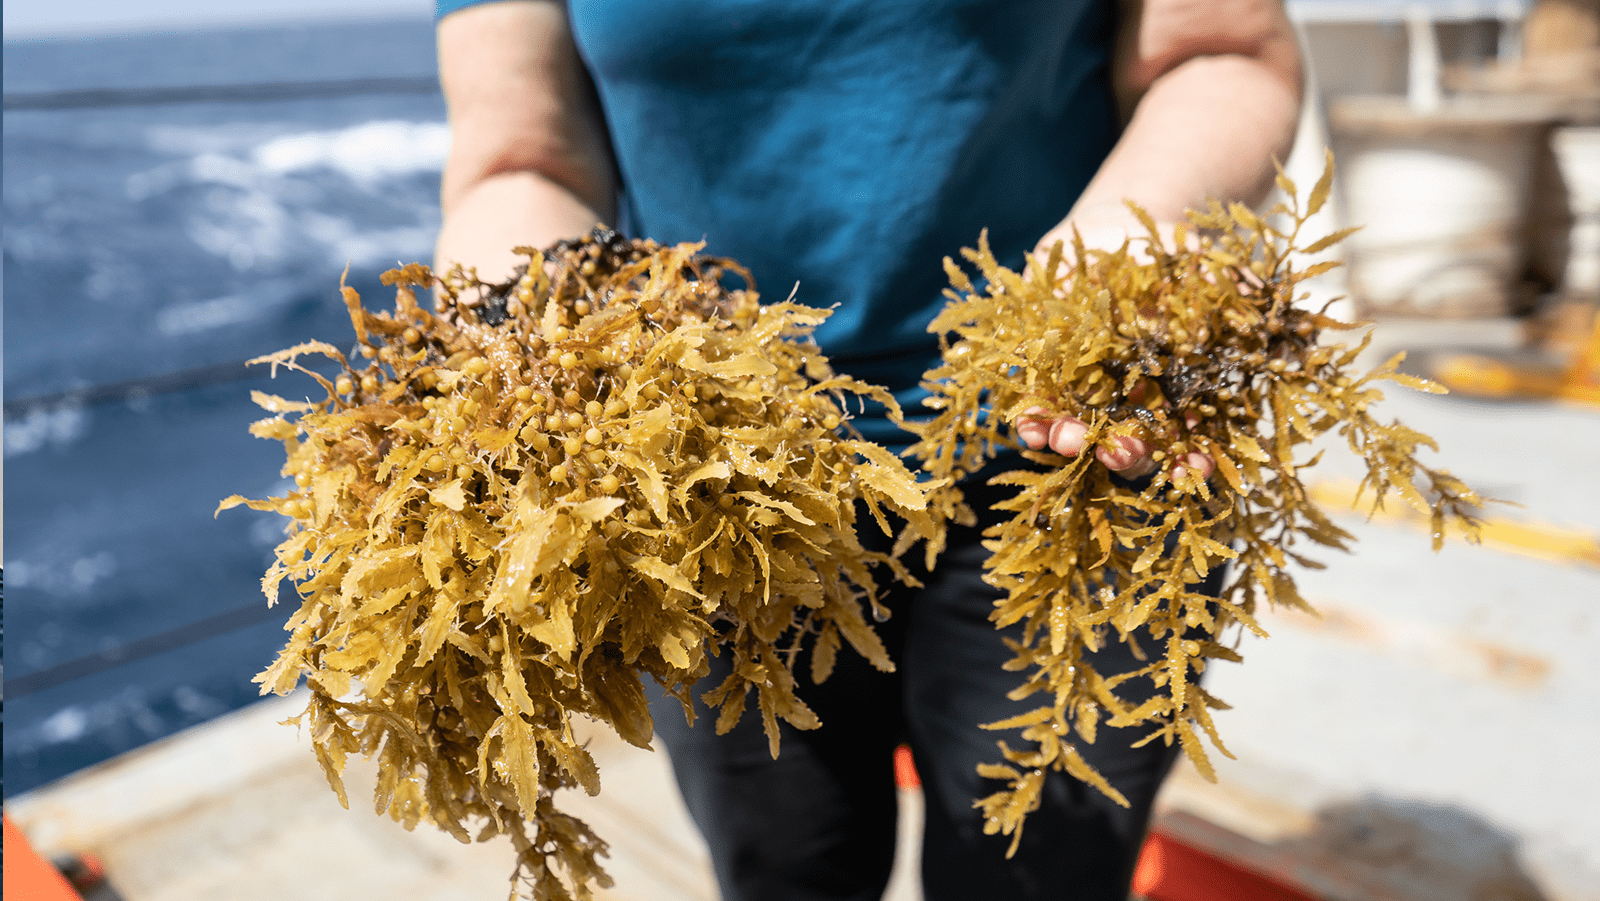 Two patches of Sargassum are held in someone's hands.